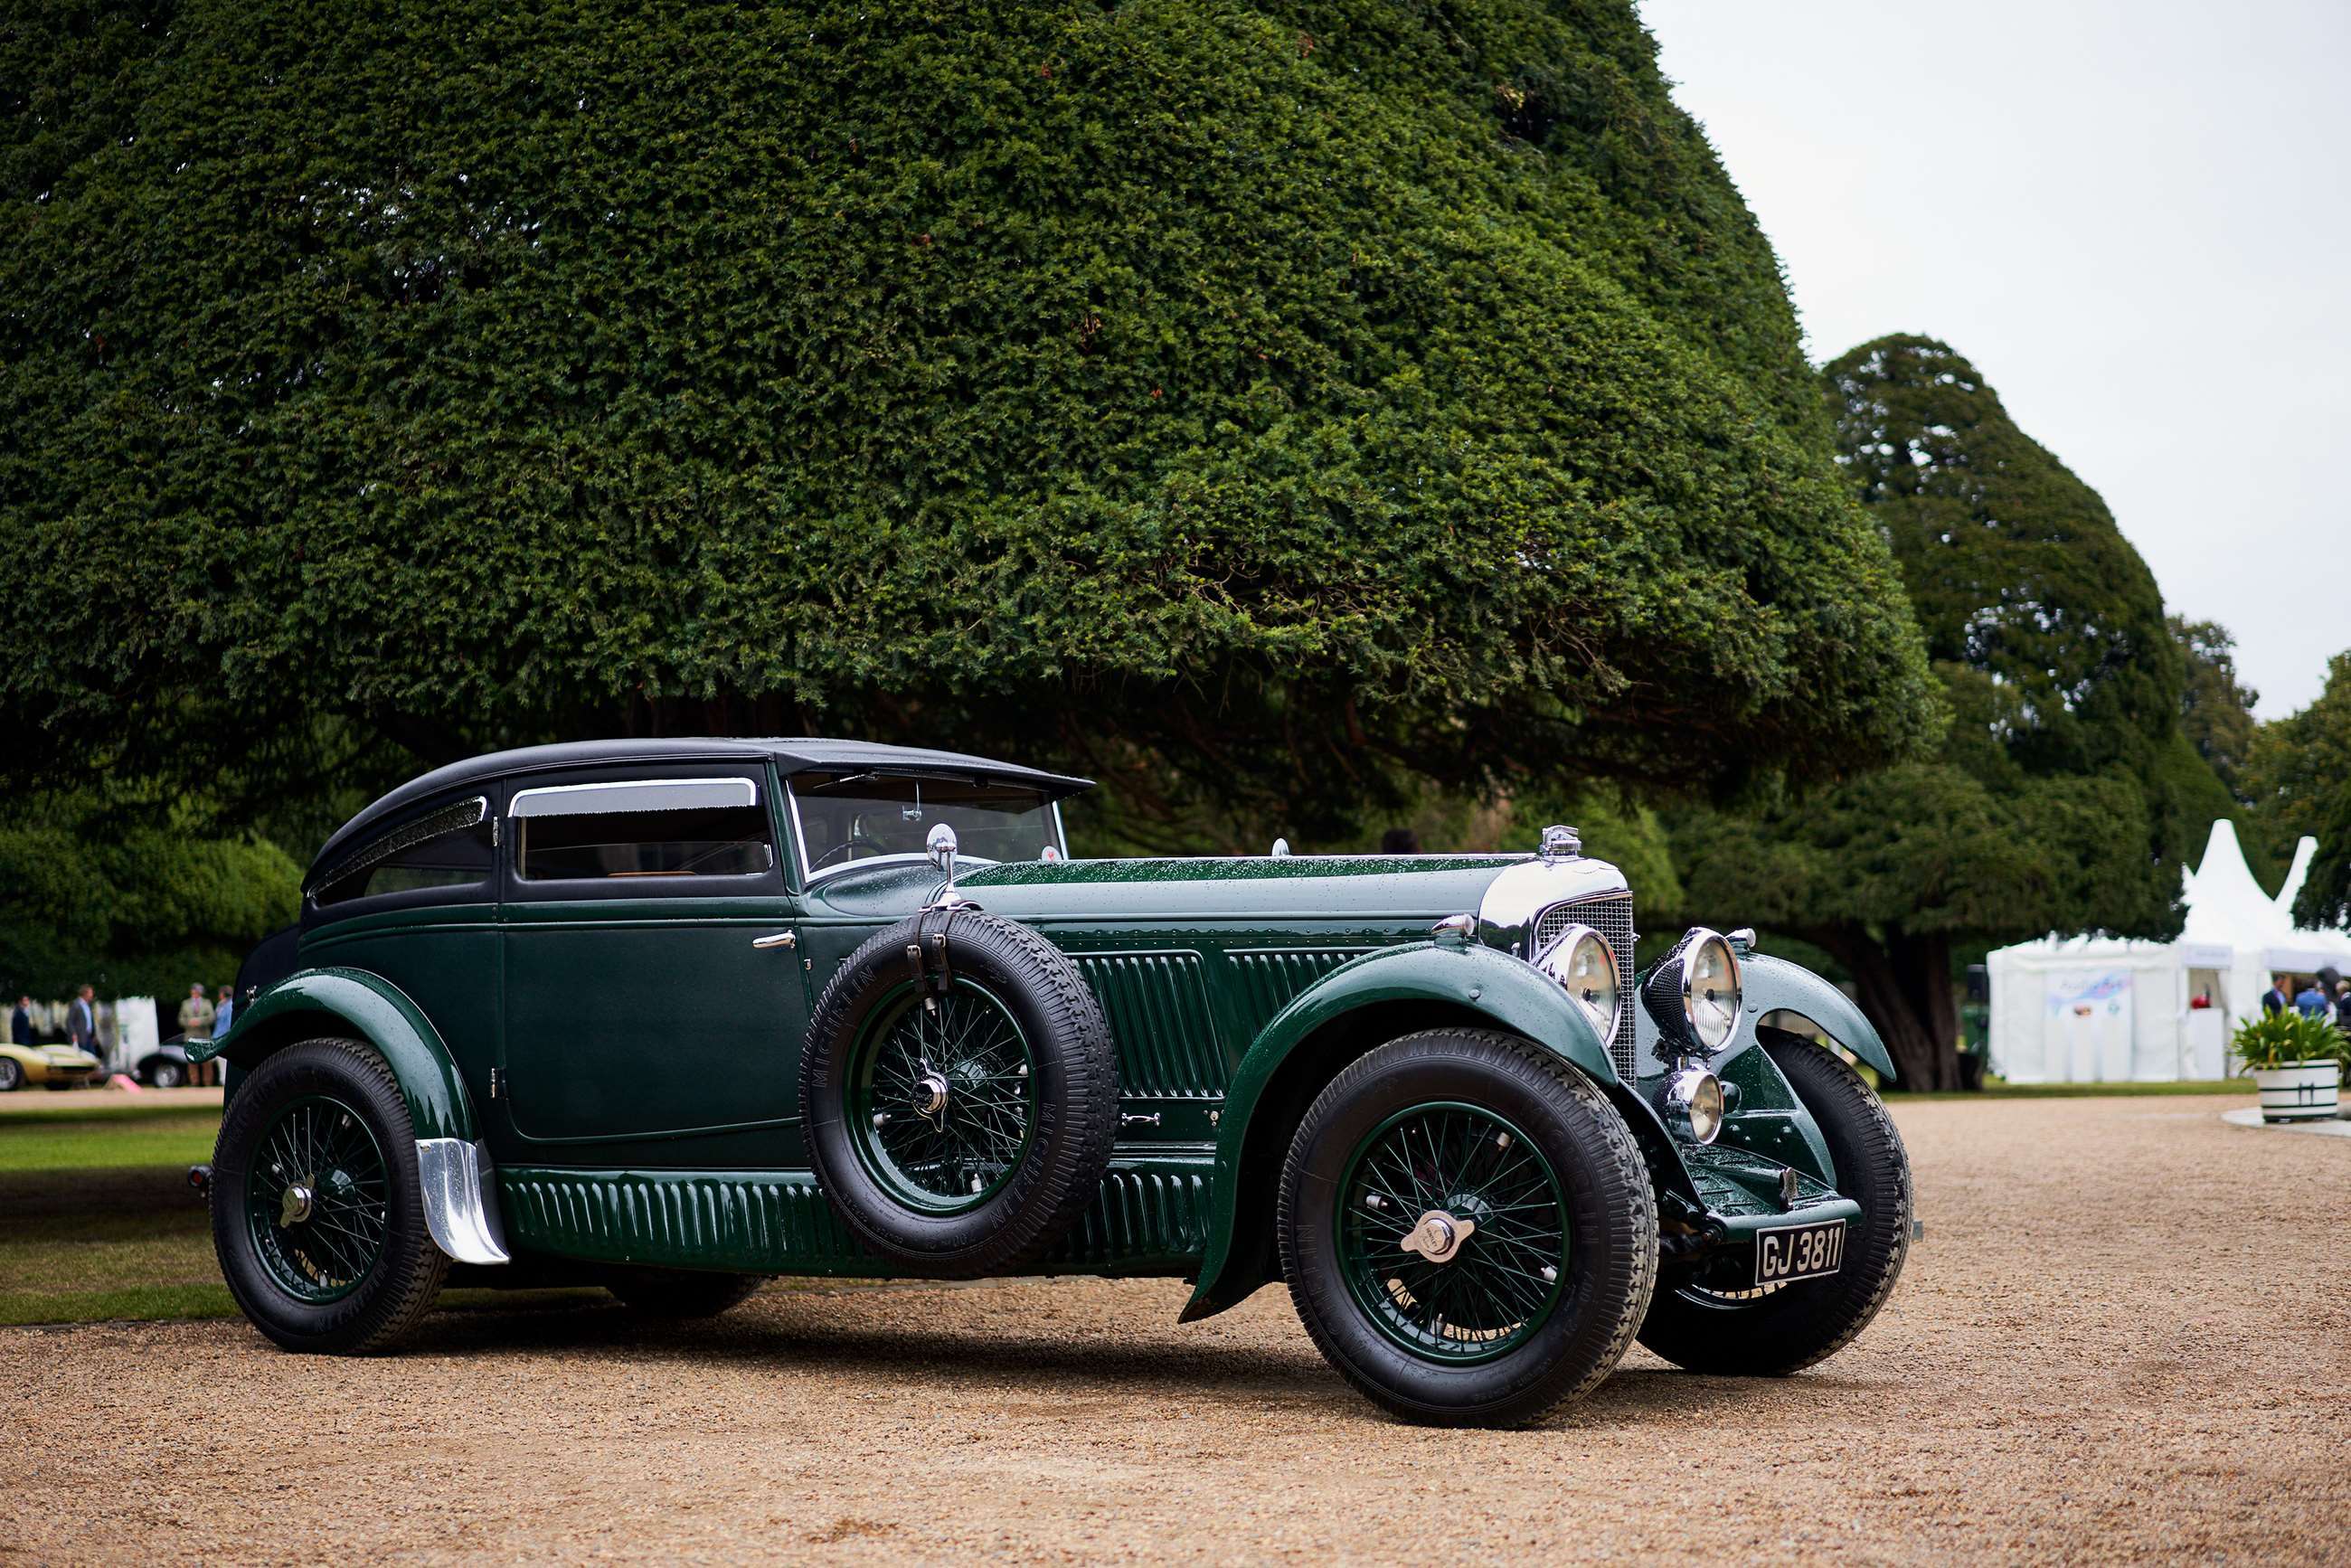 bentley-speed-six-blue-train-special-concours-of-elegance-2019-james-lynch-goodwood-10092019.jpg